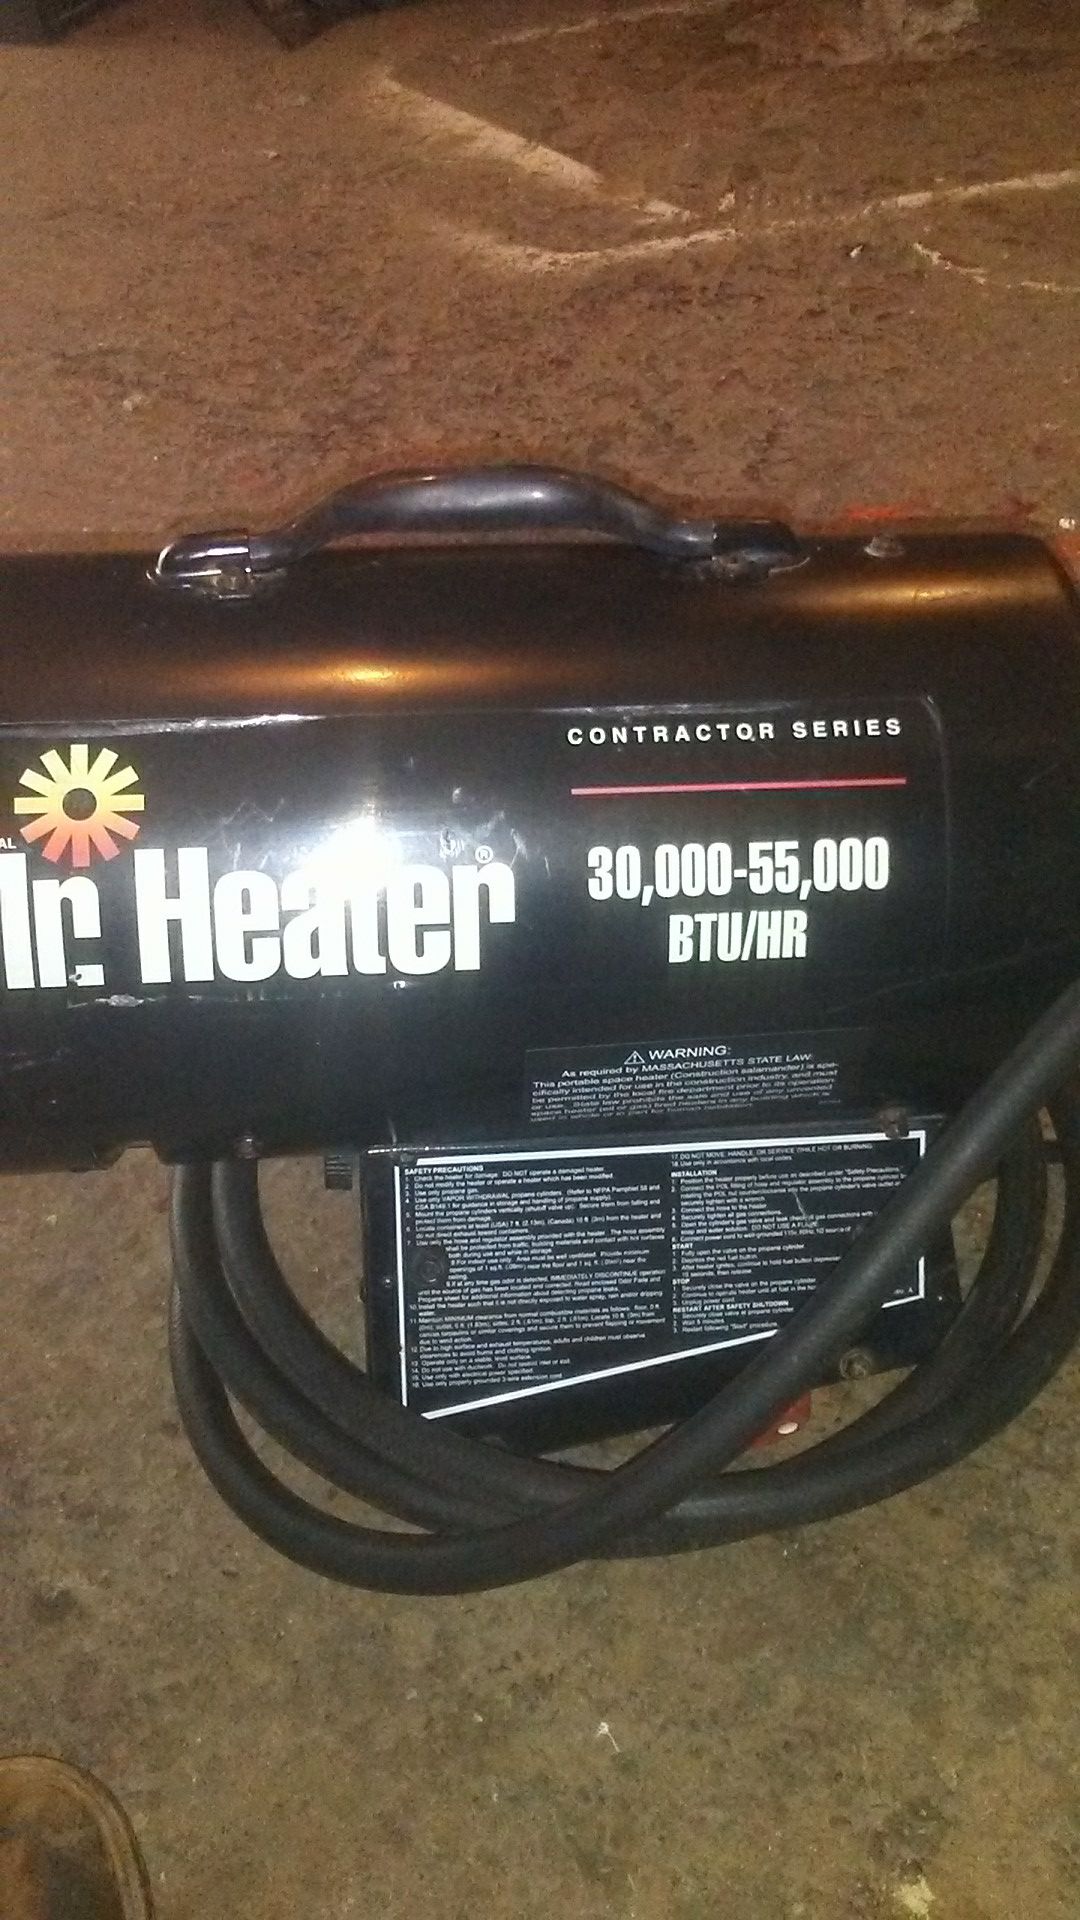 Mister heater contractor series 30.000 to 55.000 btus propane elec